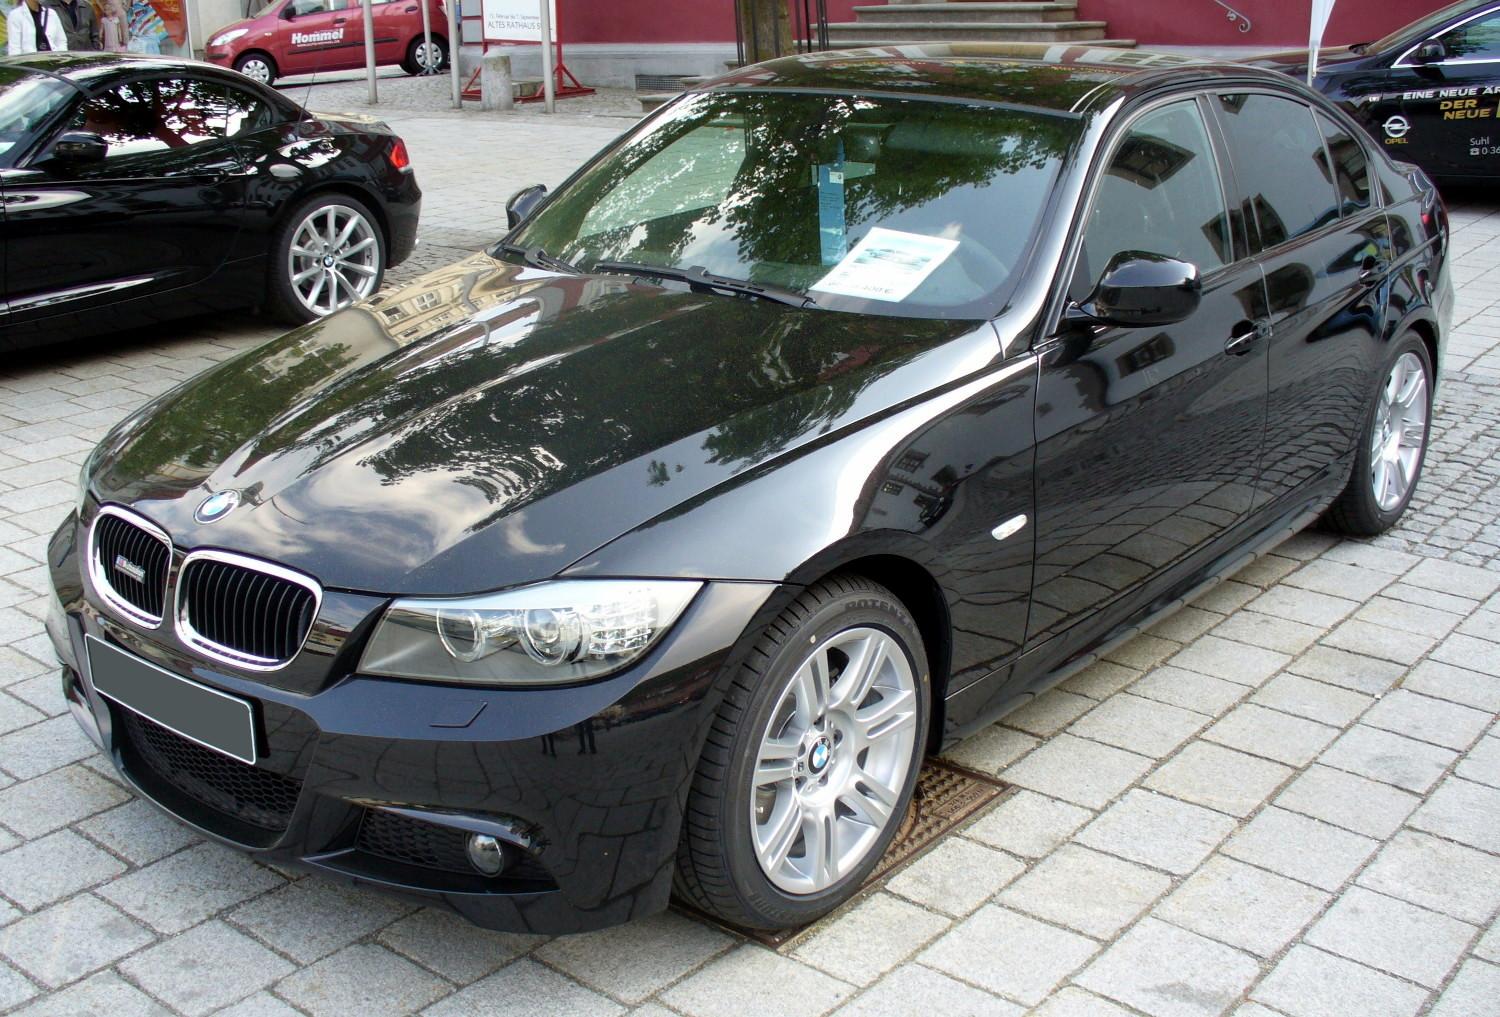 File:BMW E90 front 20090301.jpg - Wikimedia Commons